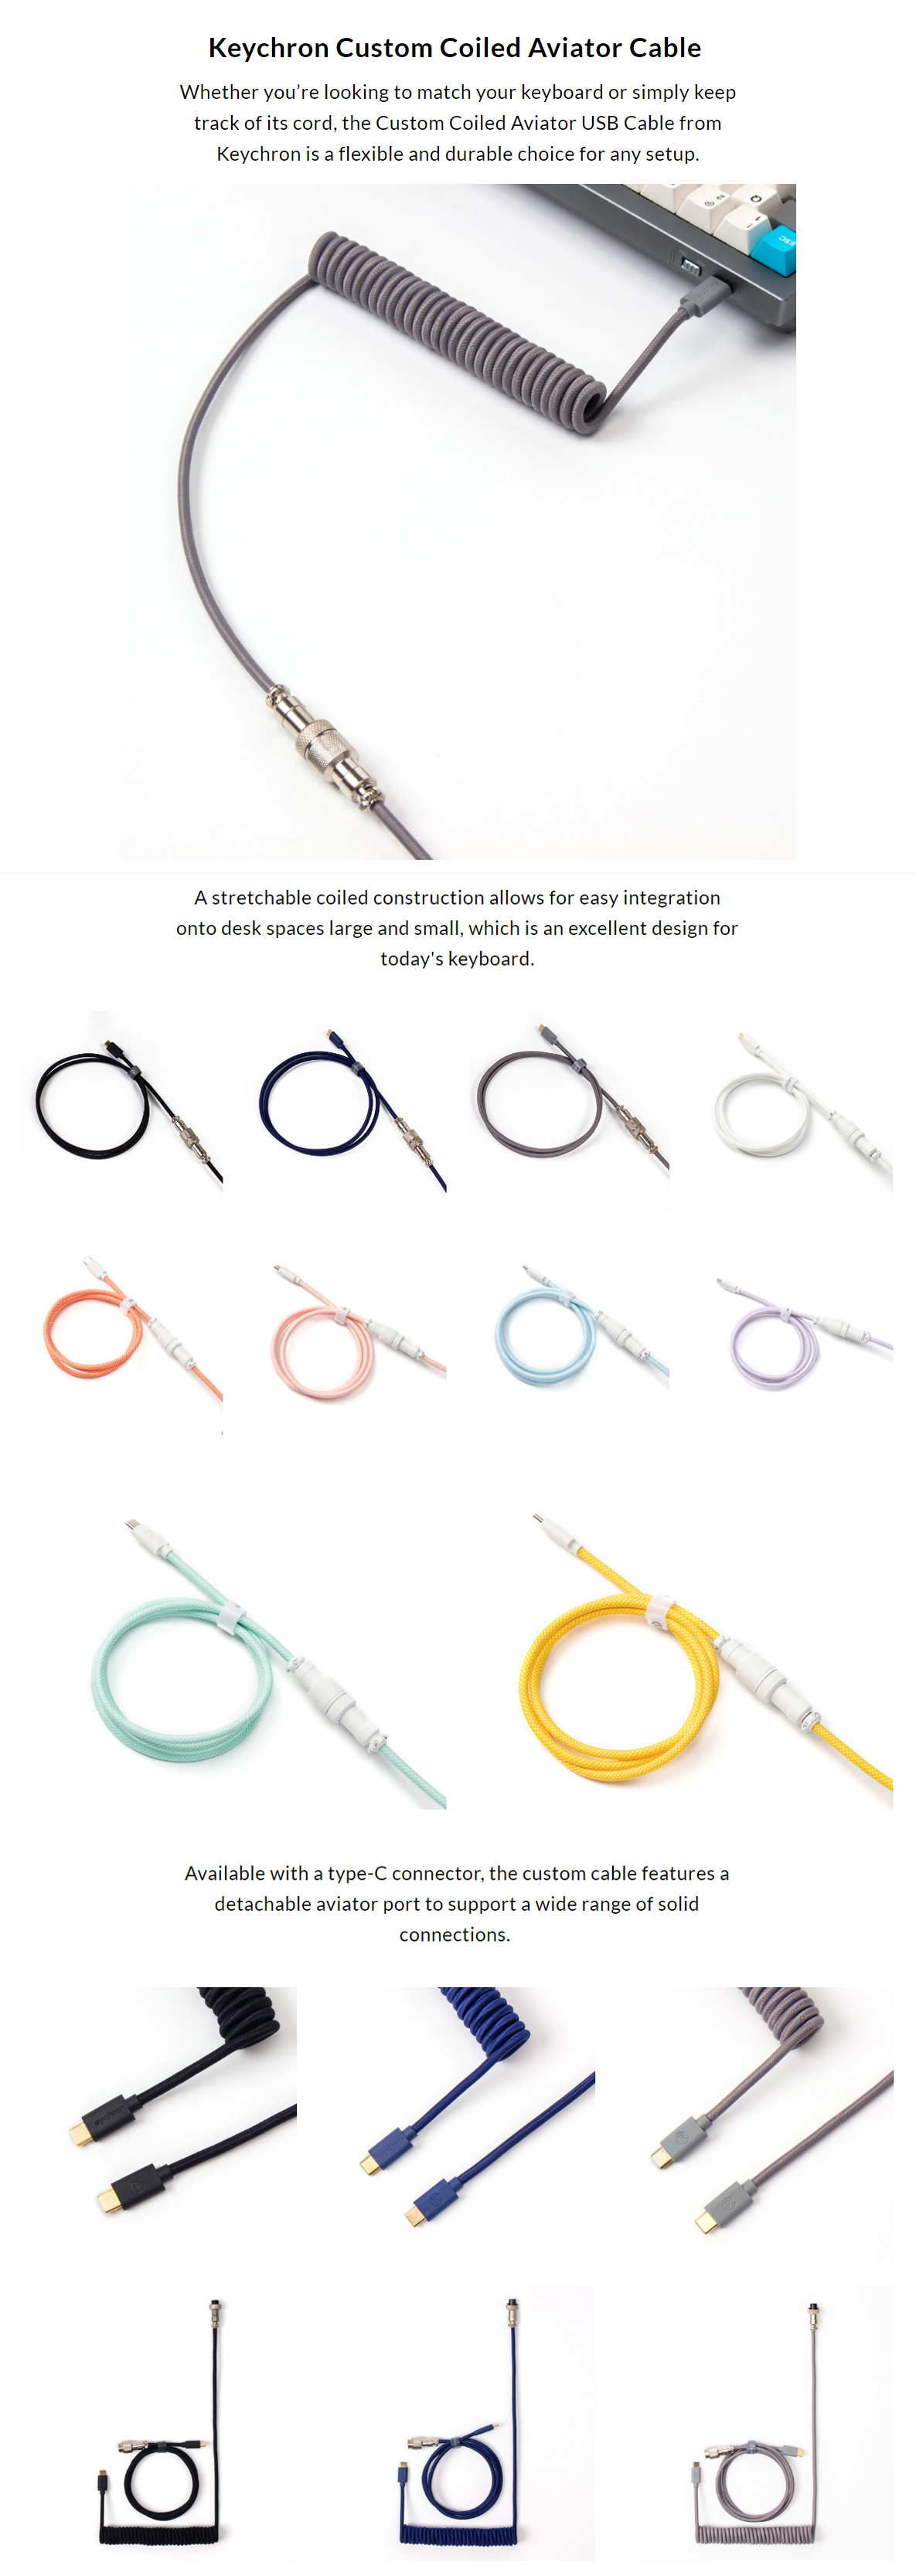 A large marketing image providing additional information about the product Keychron Custom Coiled Aviator Cable - Light Pink - Additional alt info not provided